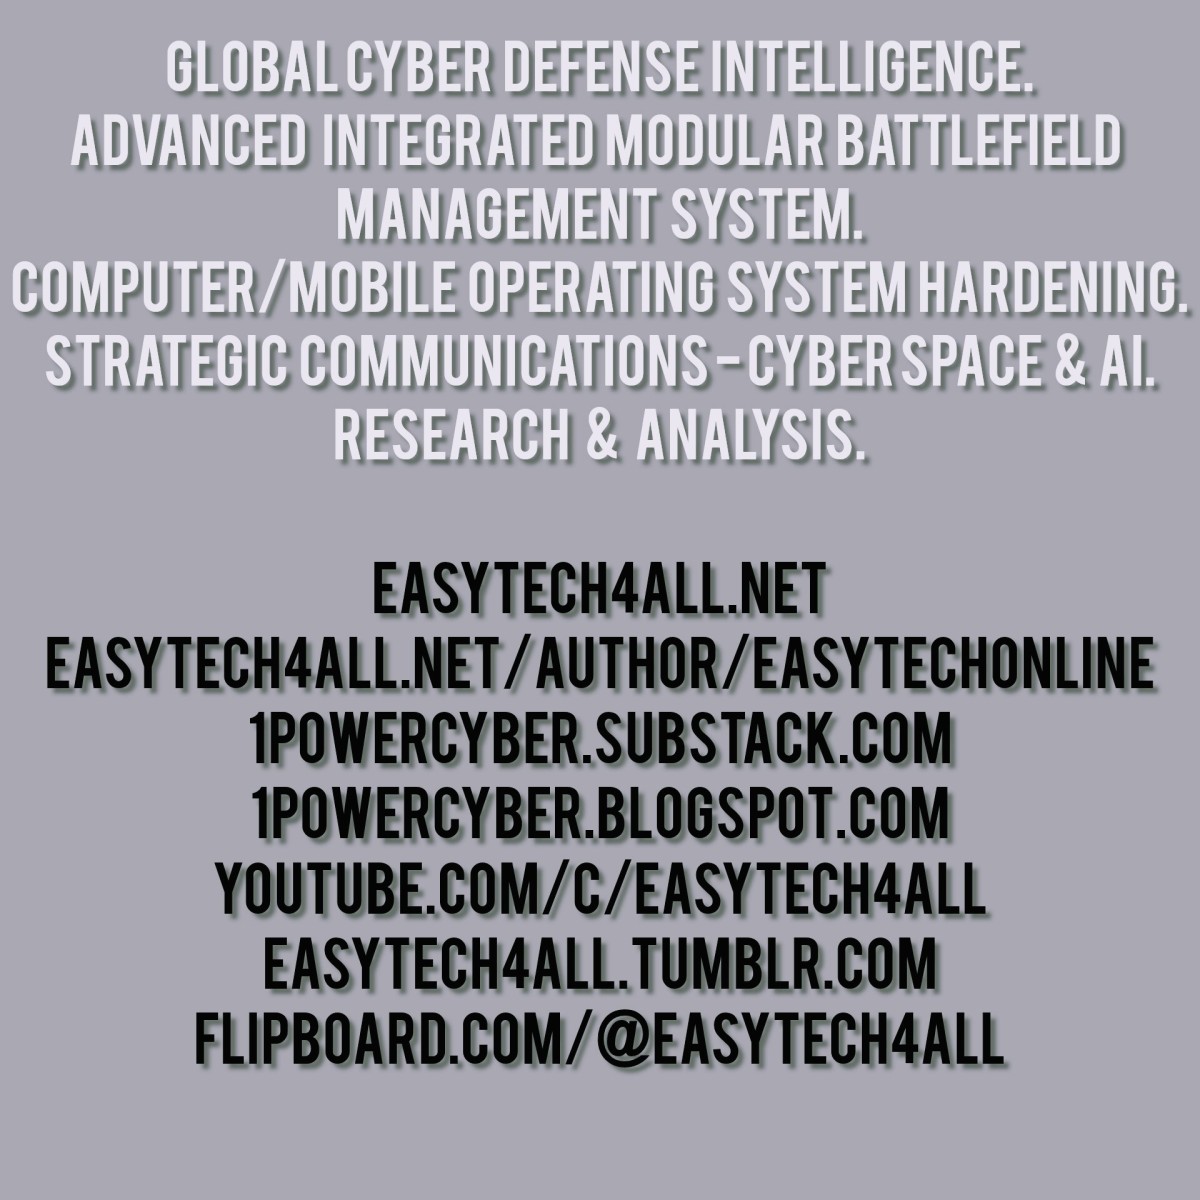 Decussation of Military/Defense , CyberSpace Intelligence Analysis with respect to data/Info ingestion for AI/ML Large Language Models ?